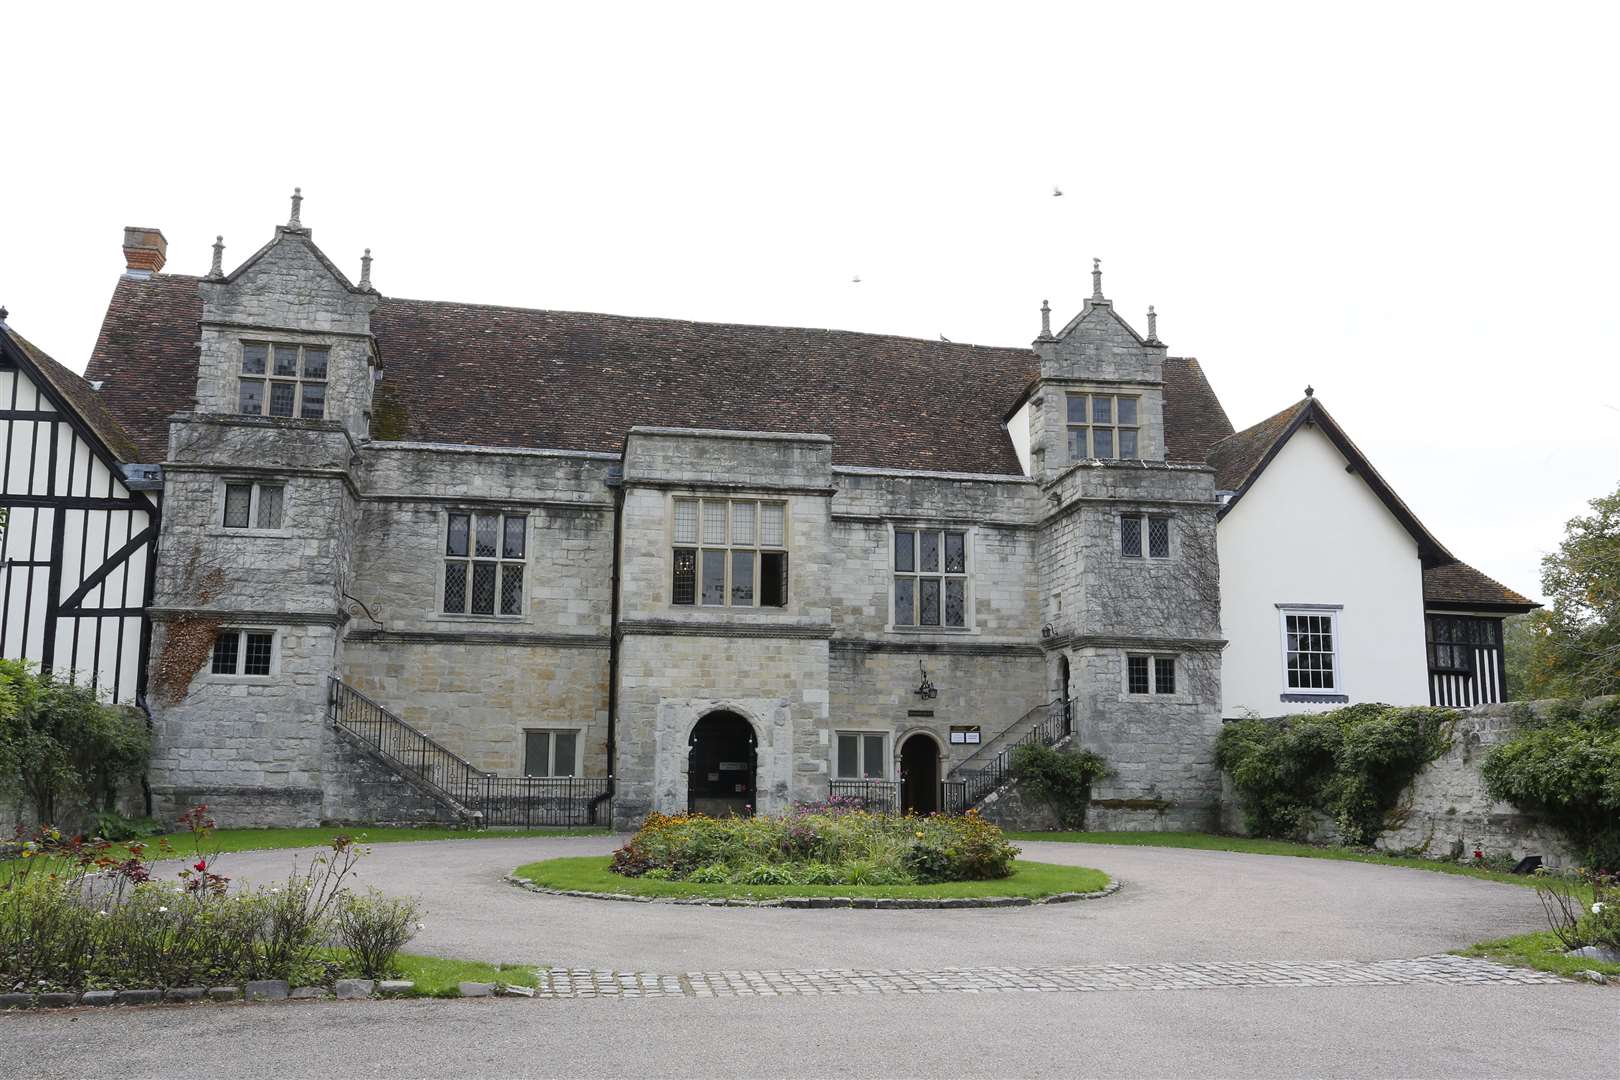 An inquest was held at the Archbishop's Palace in Maidstone